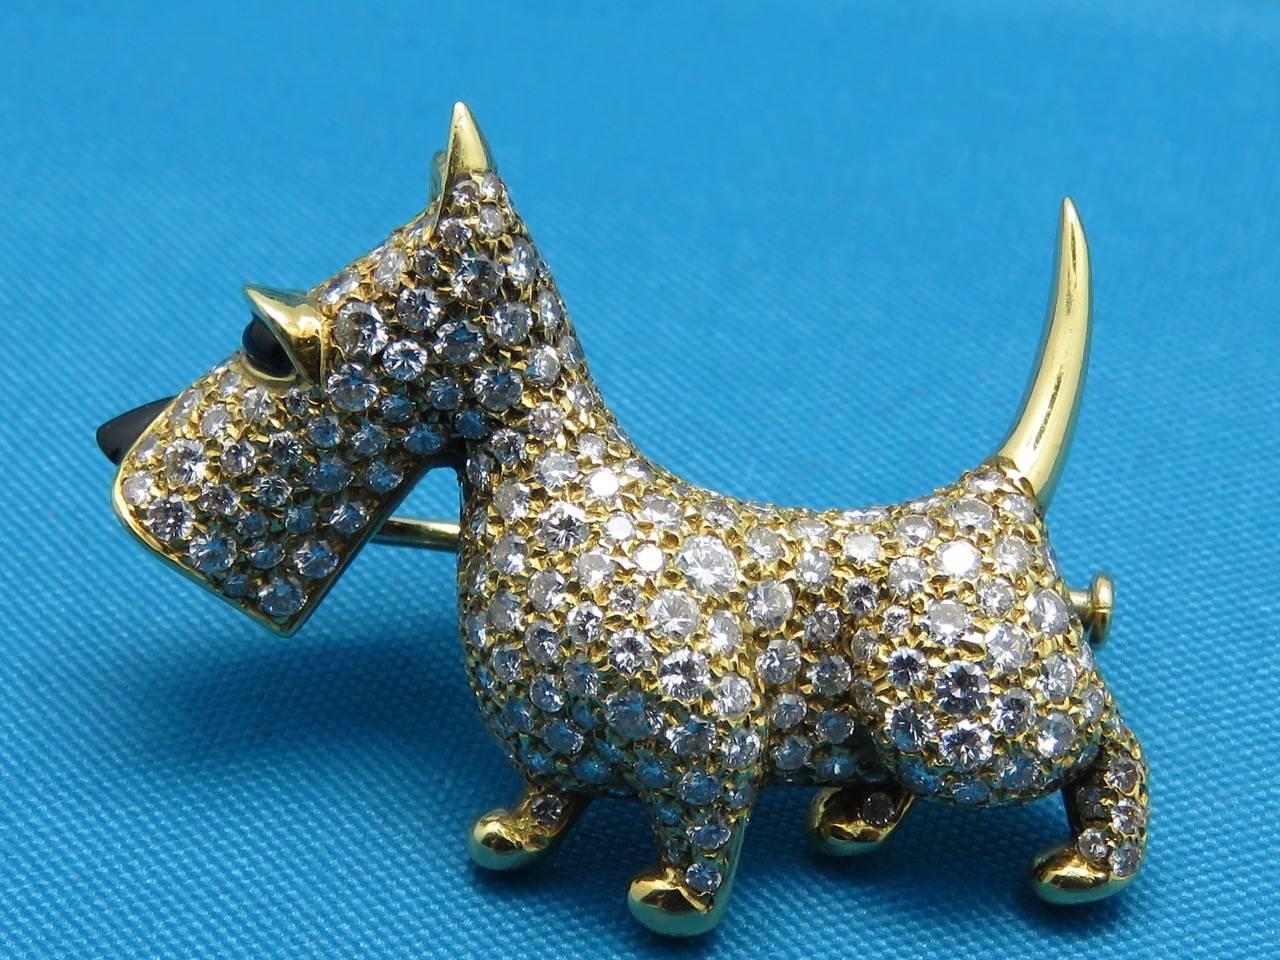 Adorable 18 k Yellow Gold Yorkshire Terrier Pin,with high quality diamonds 
2.80 carats.
Hallmarked 